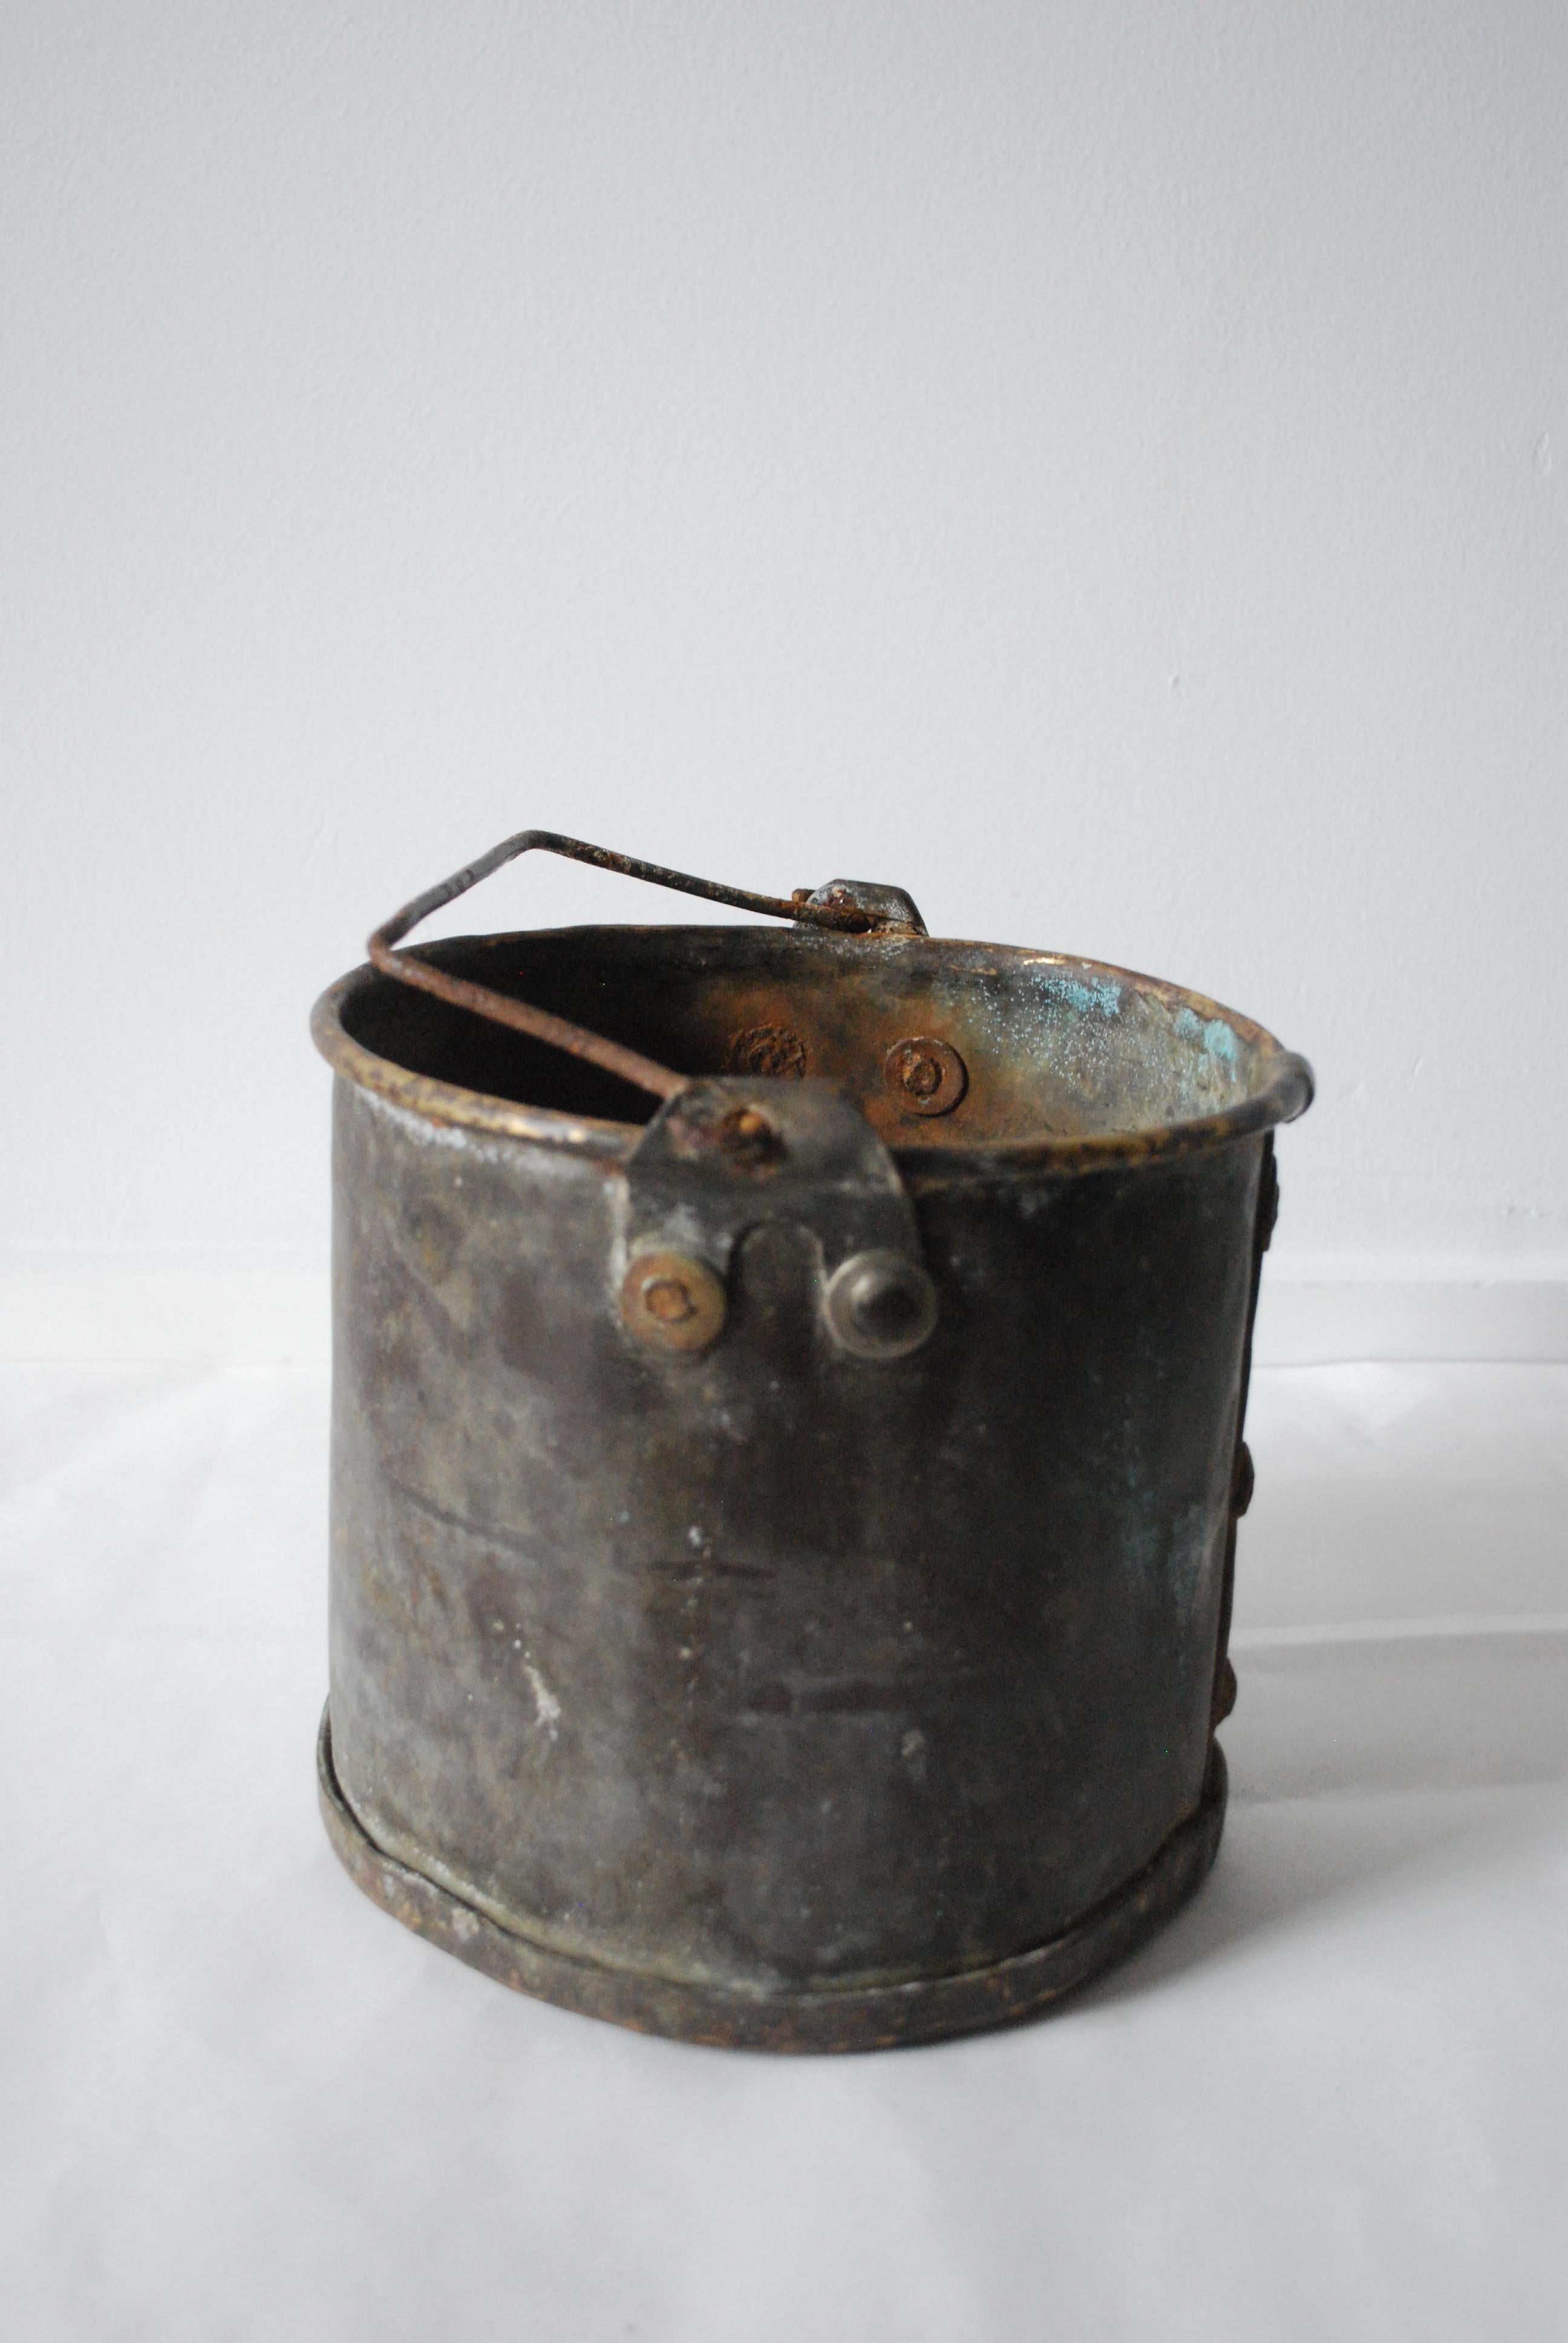 18th century European studded copper bucket with beautiful patina.